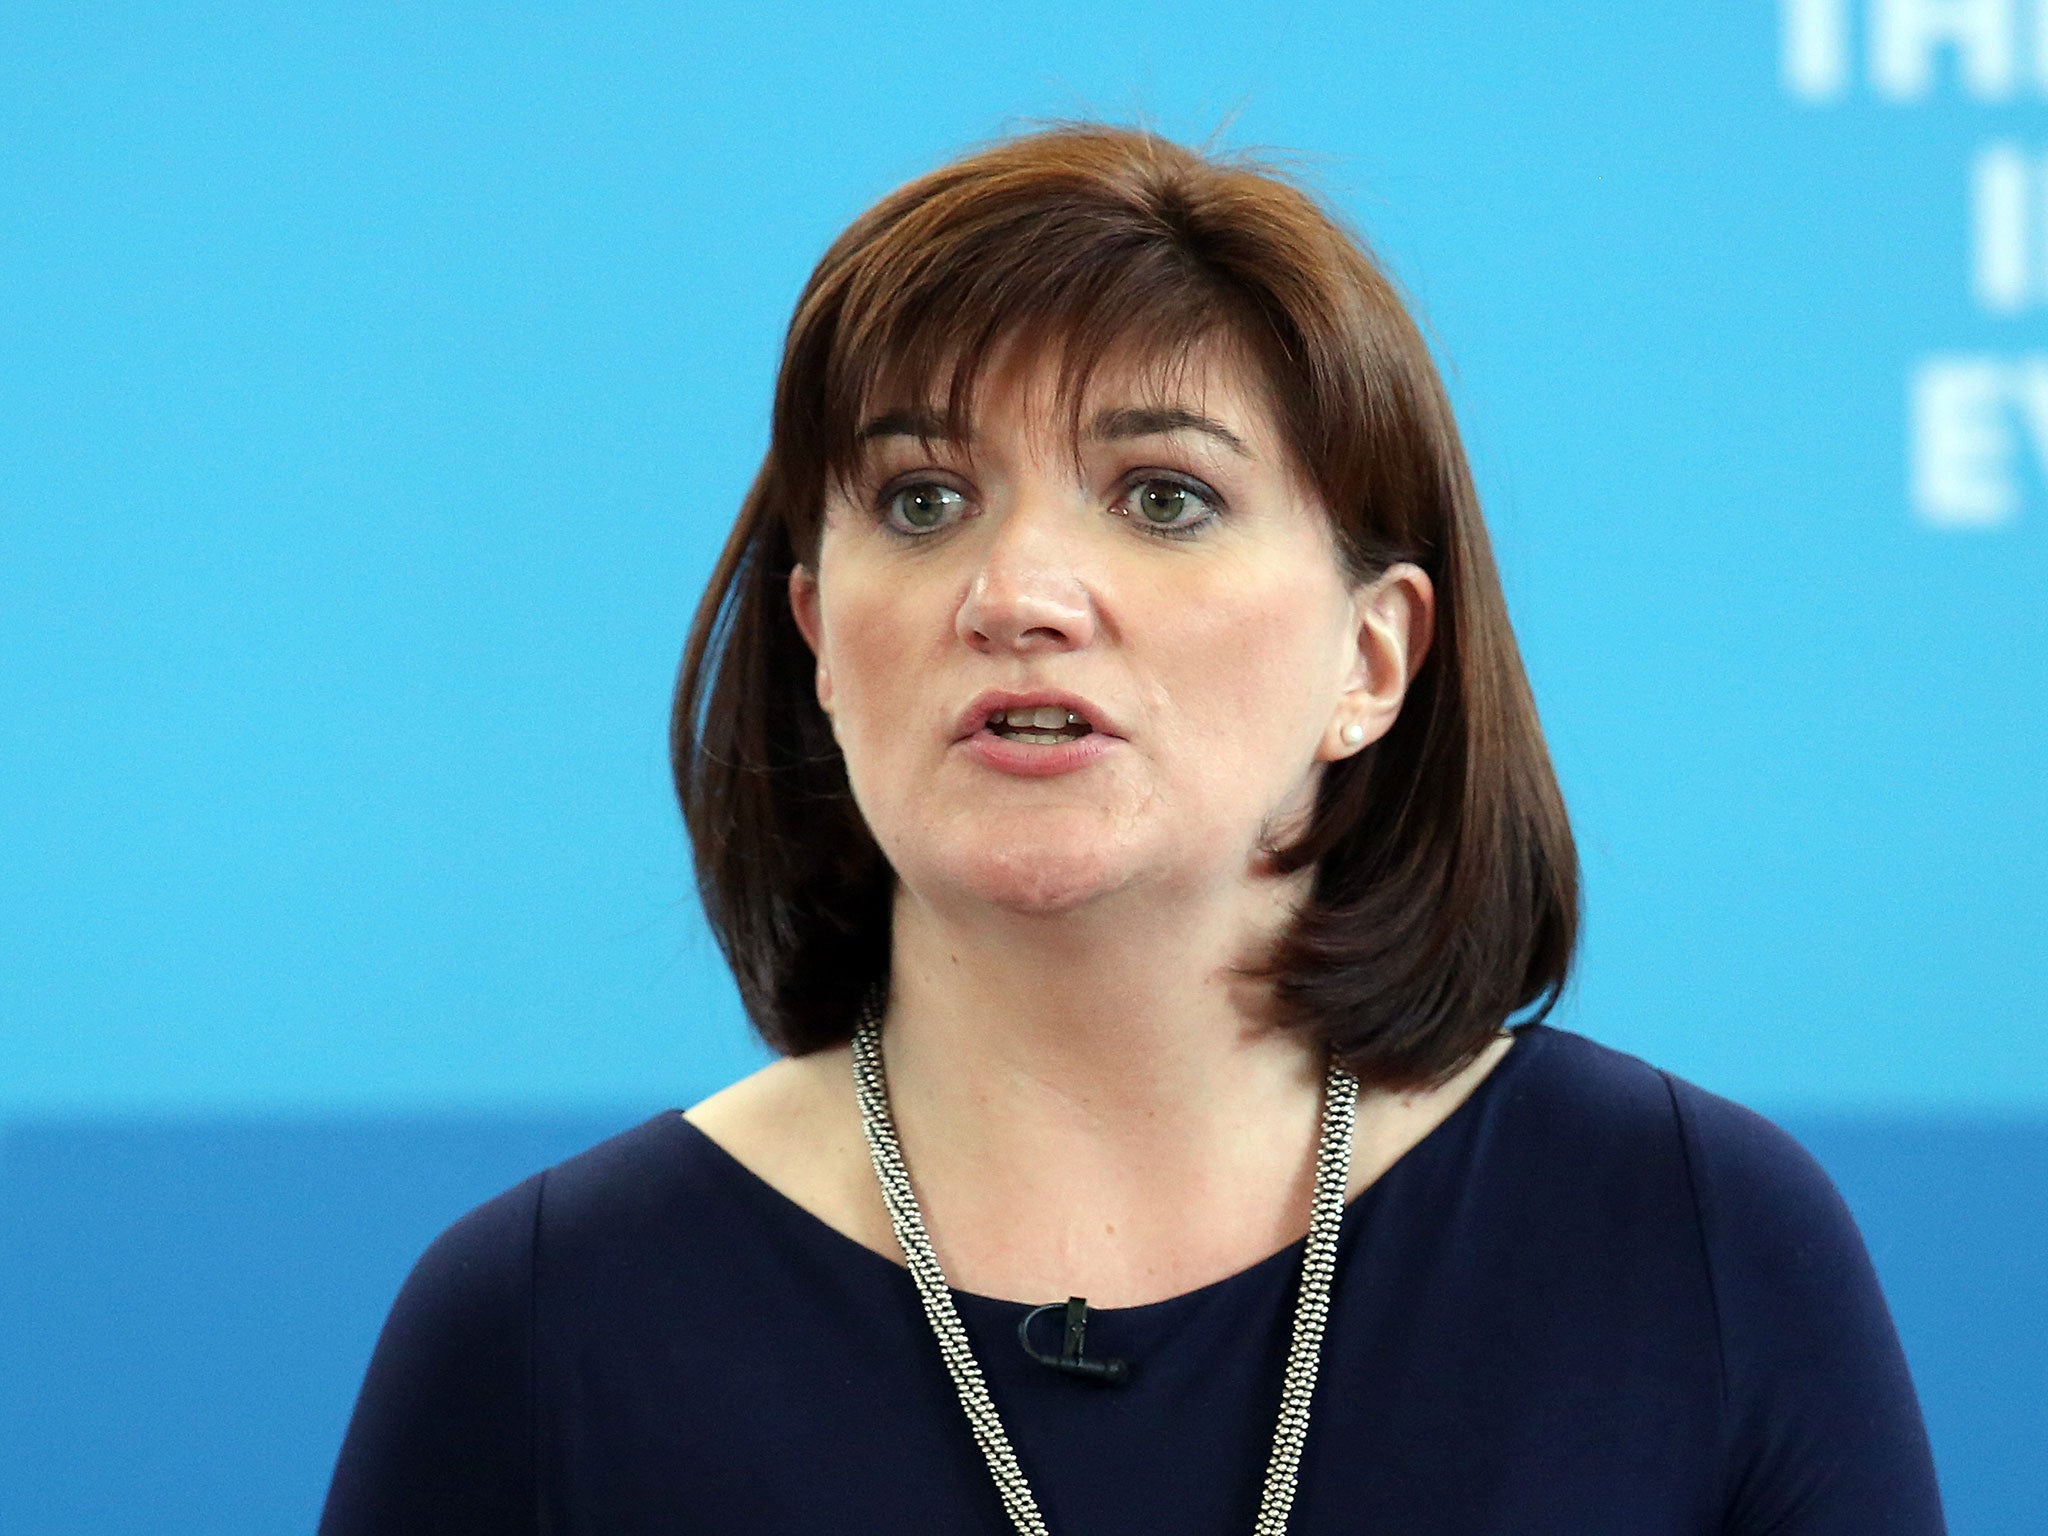 Nicky Morgan, chair of the Treasury Select Committee, warns of 'dramatic and damaging' consequences if no agreement is reached